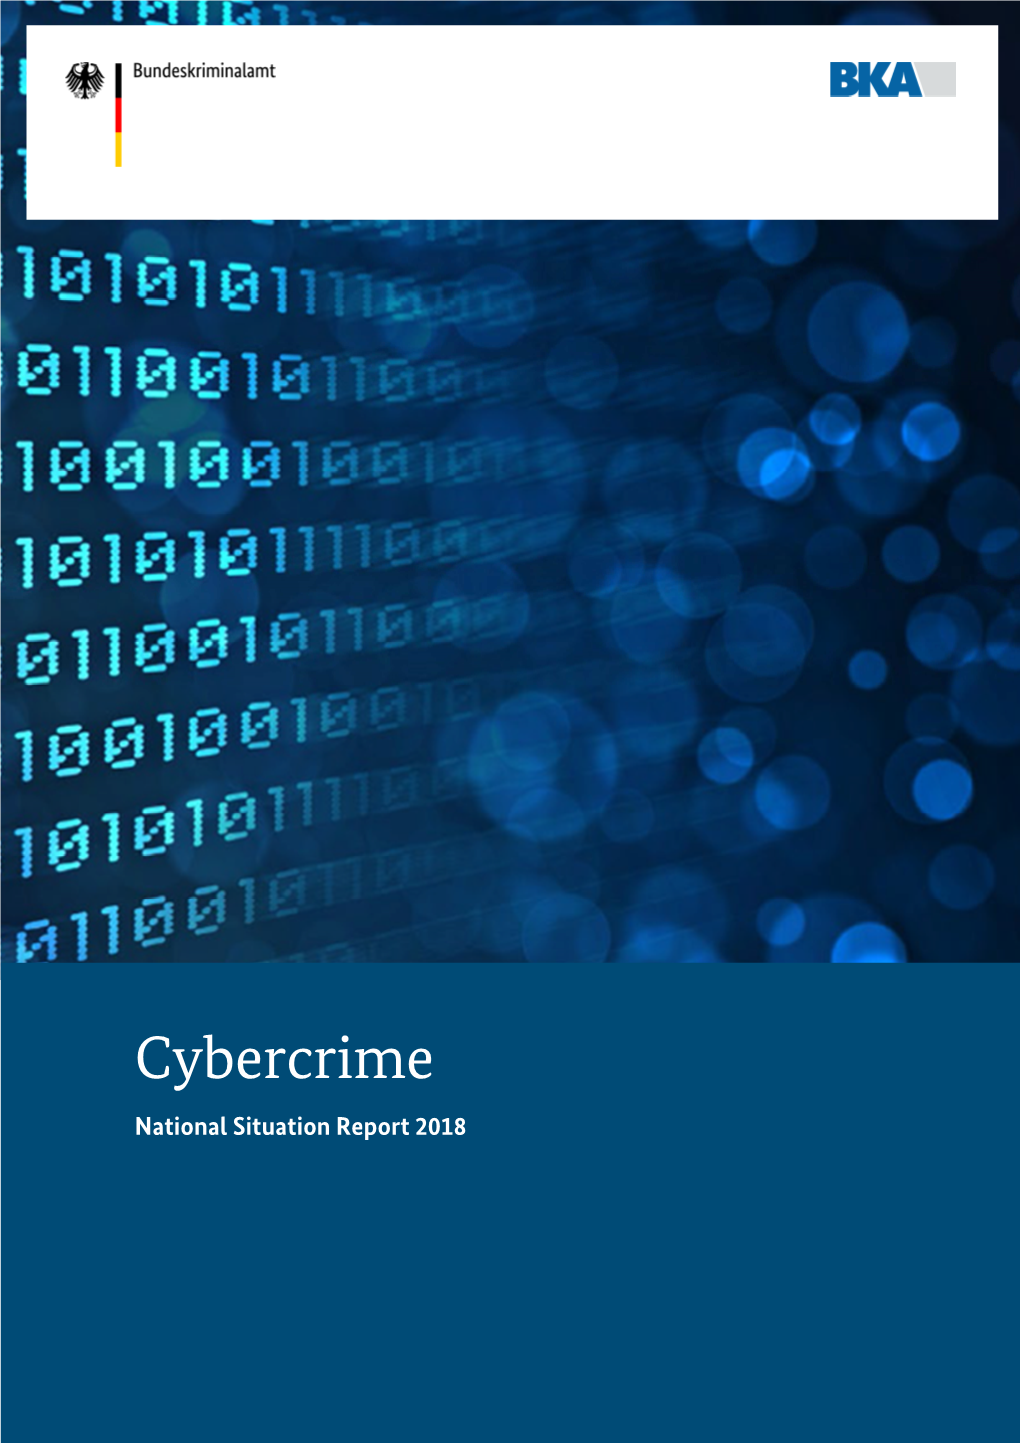 National Situation Reports on Cybercrime 2018